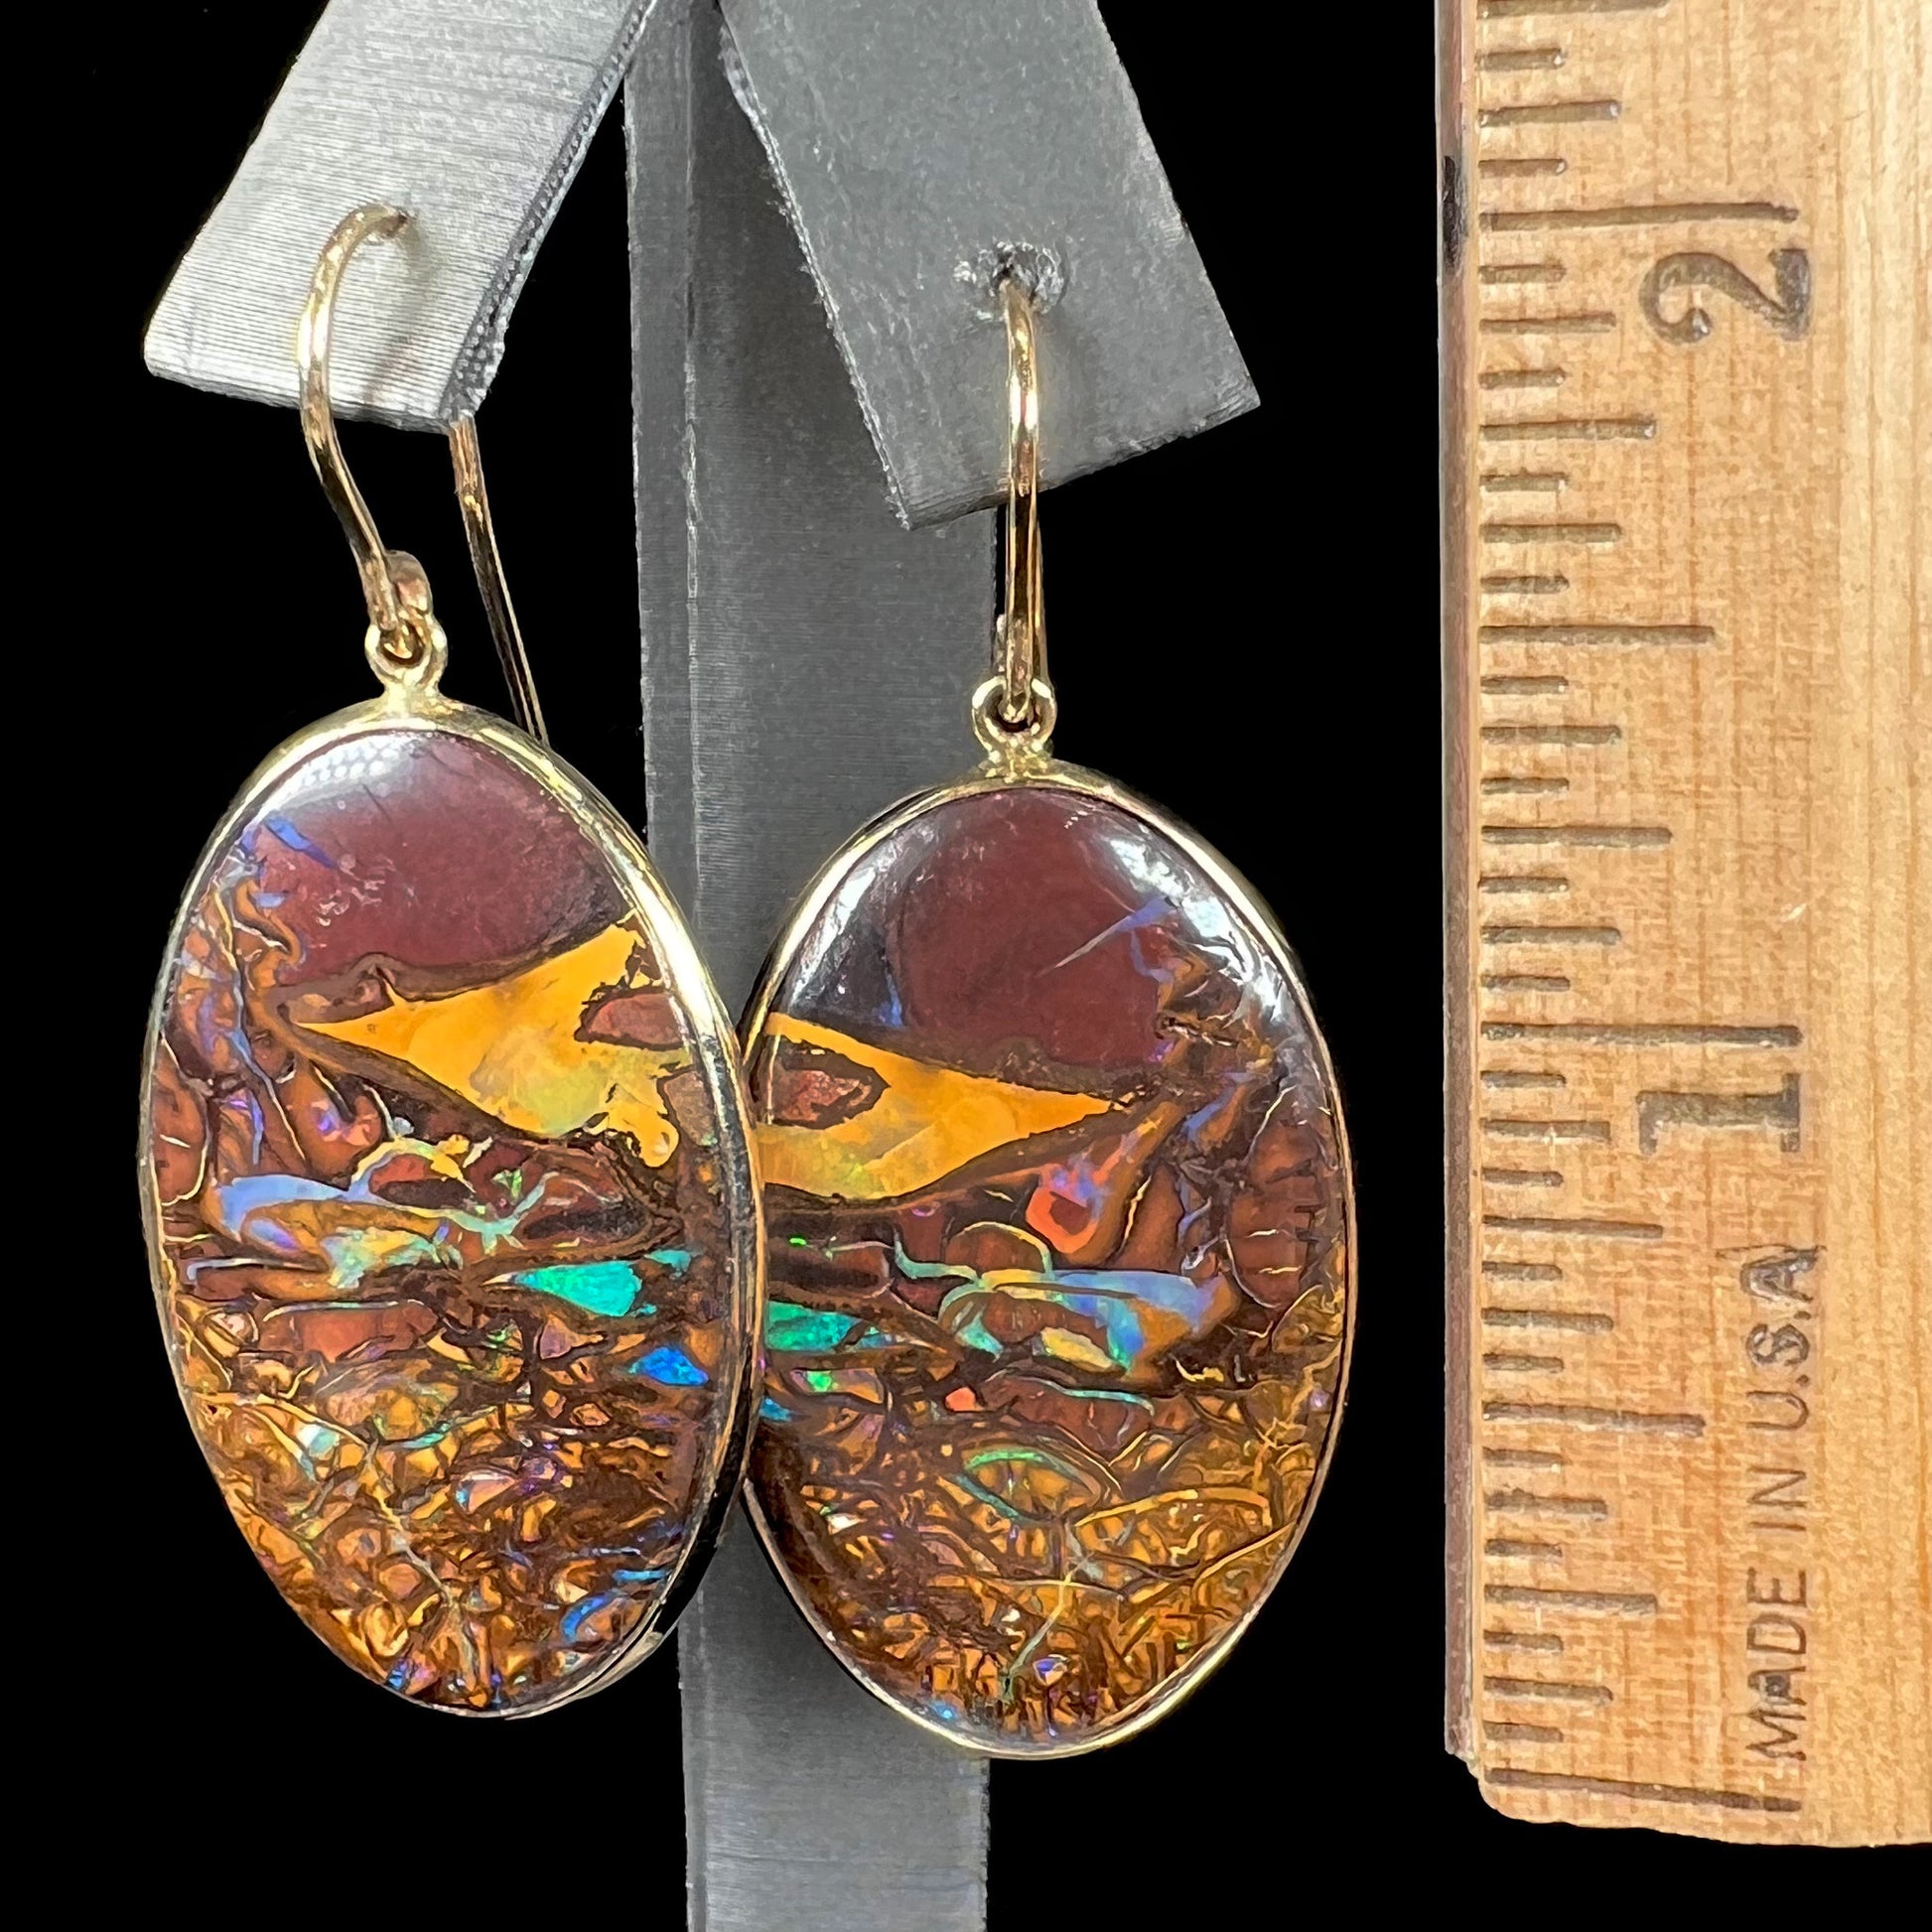 A pair of oval cut Koroit boulder opal dangle earrings in yellow gold bezel frames.  The opal exhibits a unique pattern and blue colors.